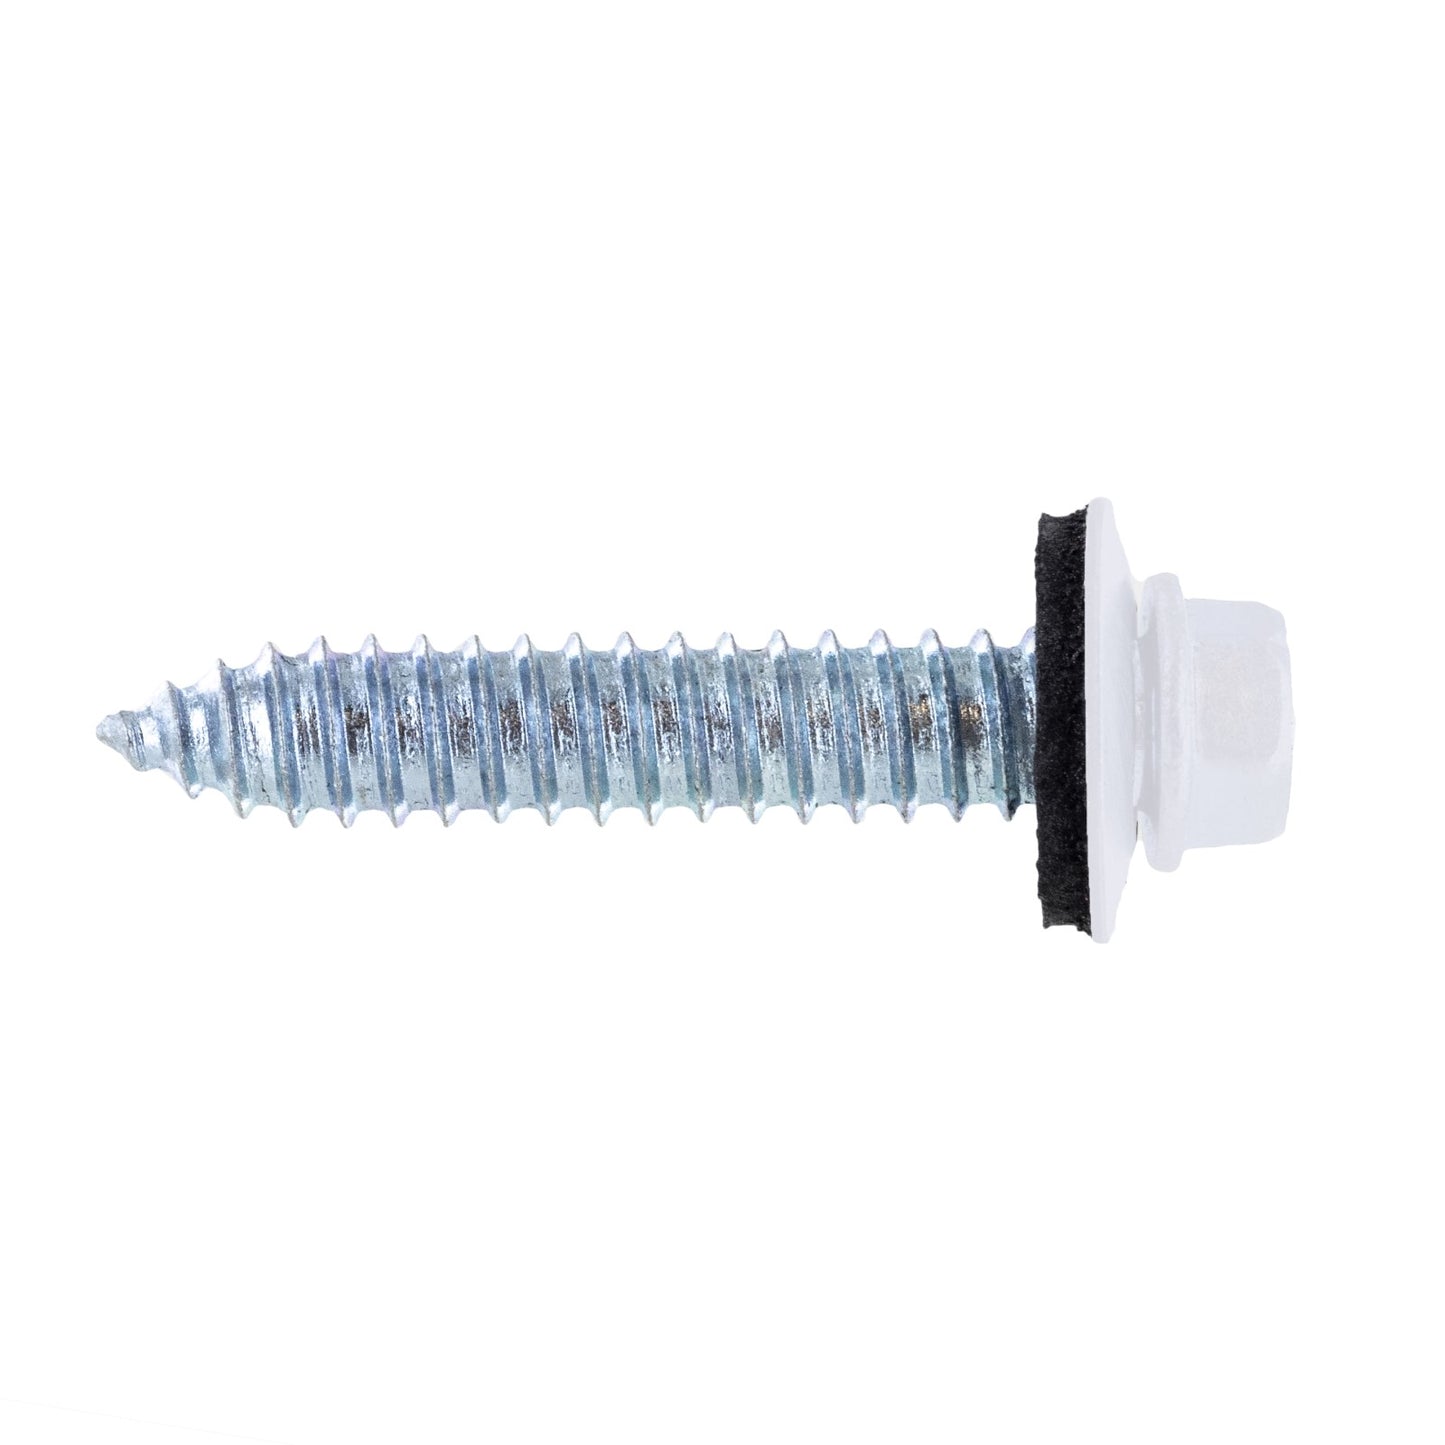 #17 x 1-1/2" Tapping Steelbinder Metal Roofing Screw - Bright White - Pkg 250